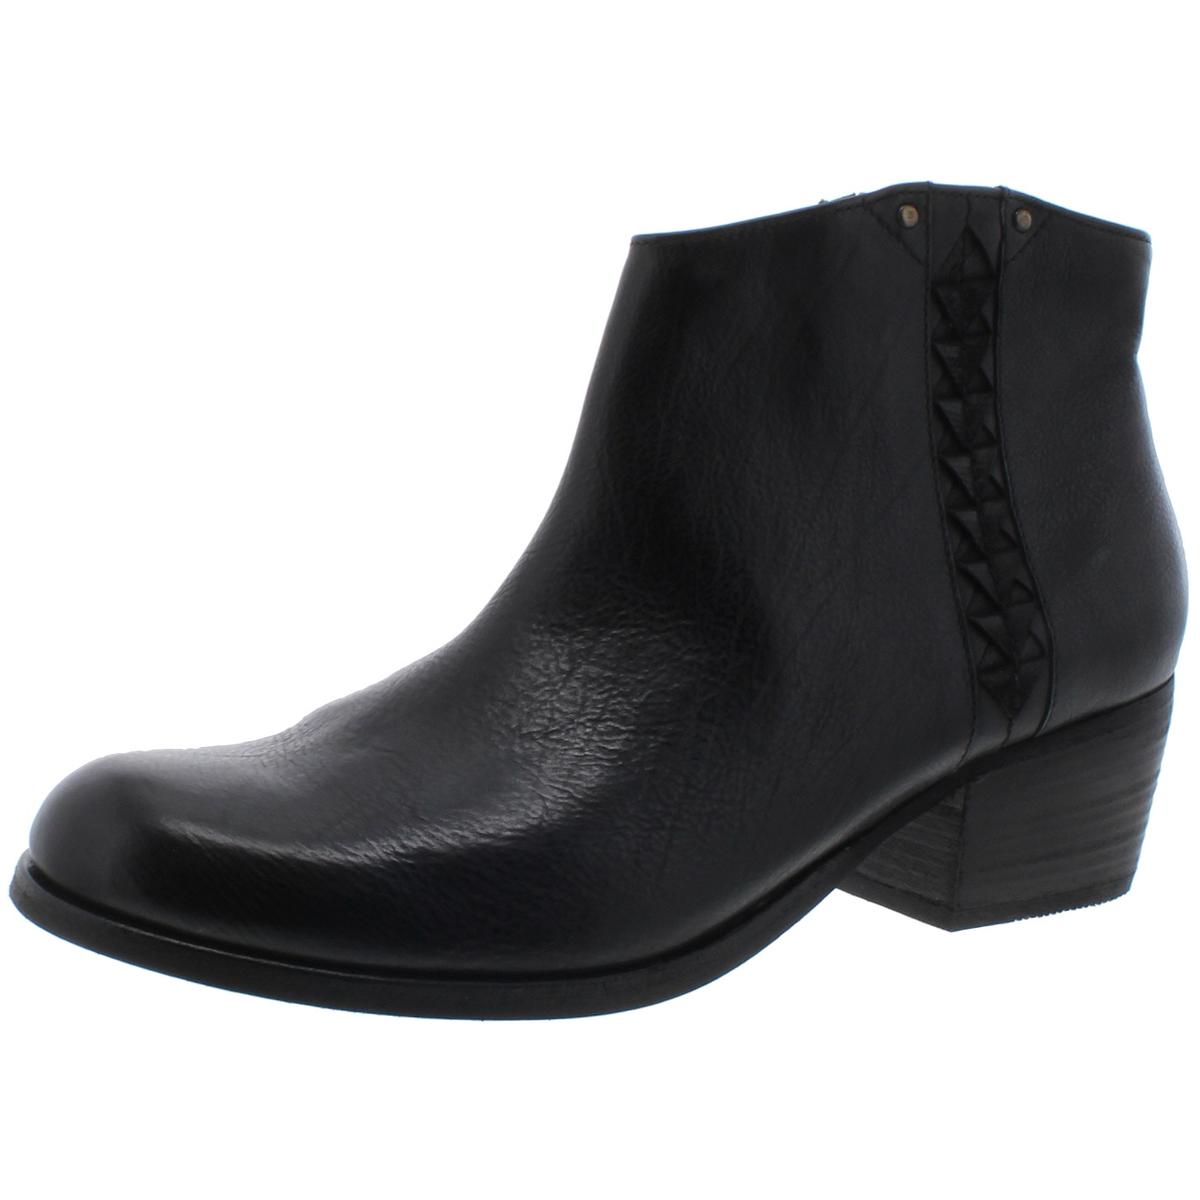 Clarks Womens Maypearl Fawn Black Leather Booties Shoes 9 Medium (B,M ...